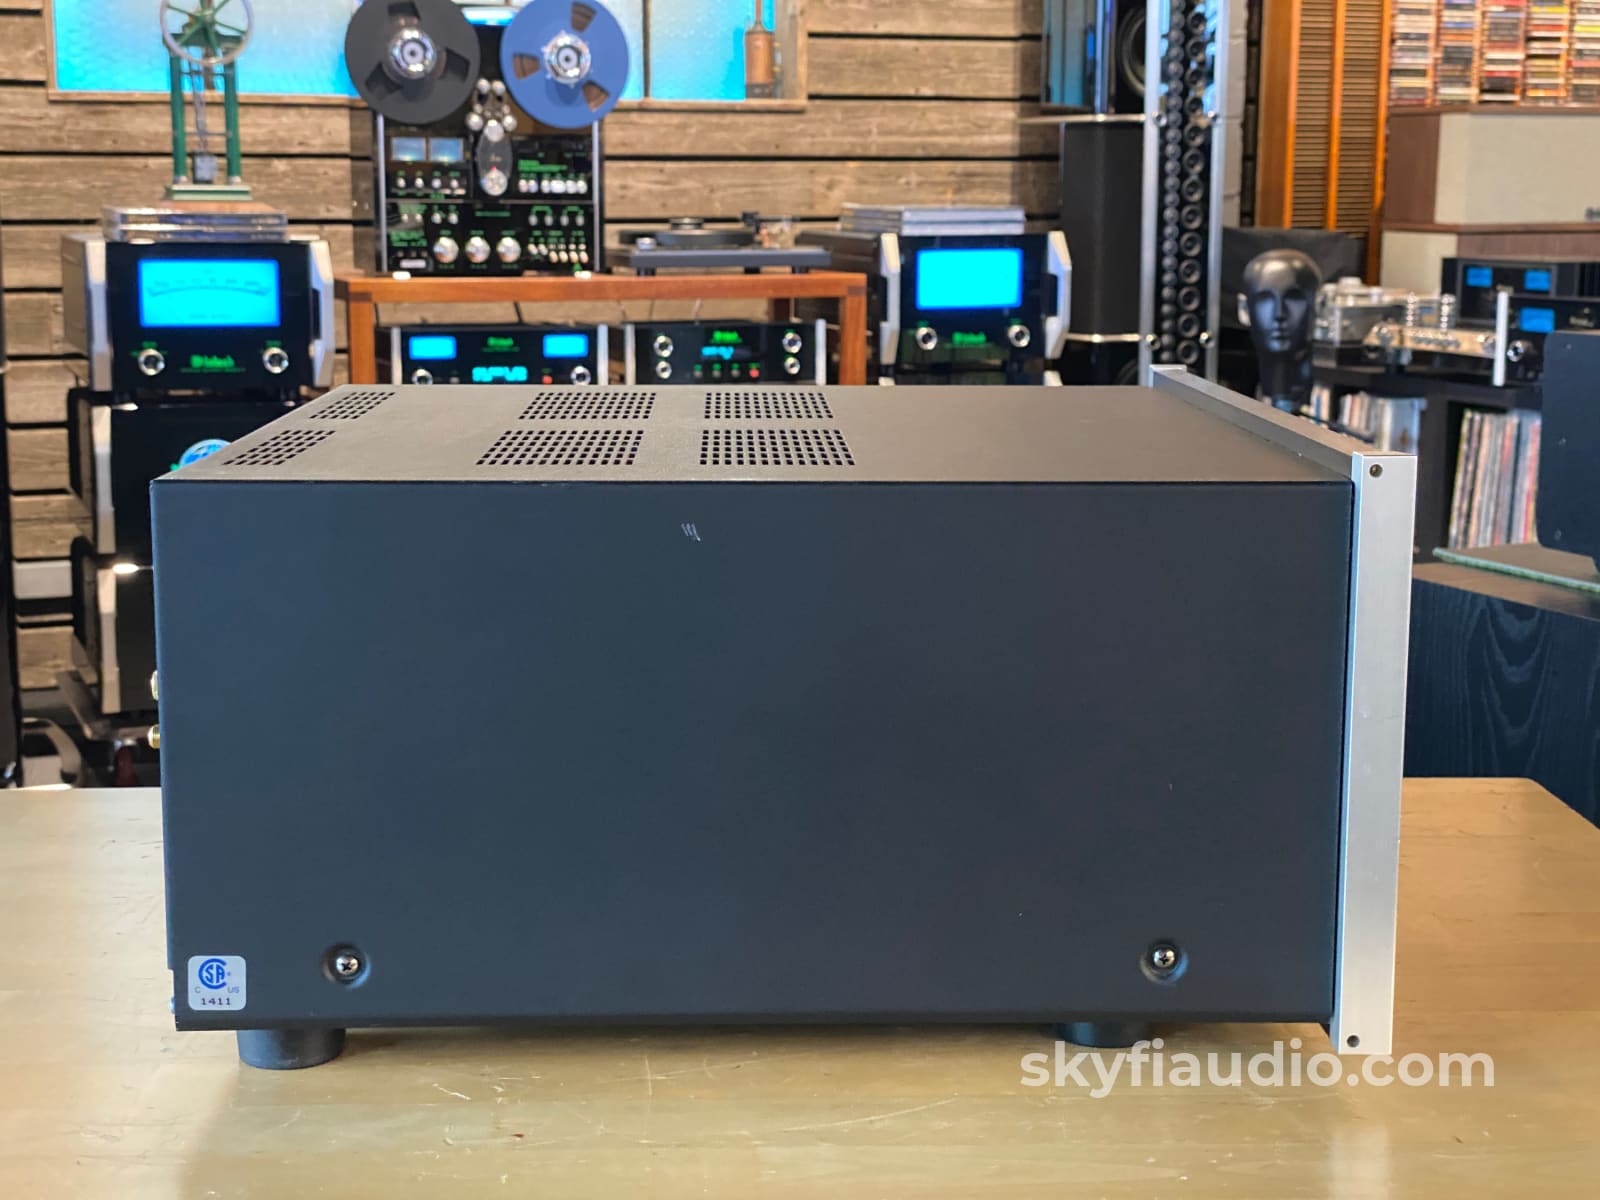 Mcintosh Mx136 Home Theater Processor And Preamp